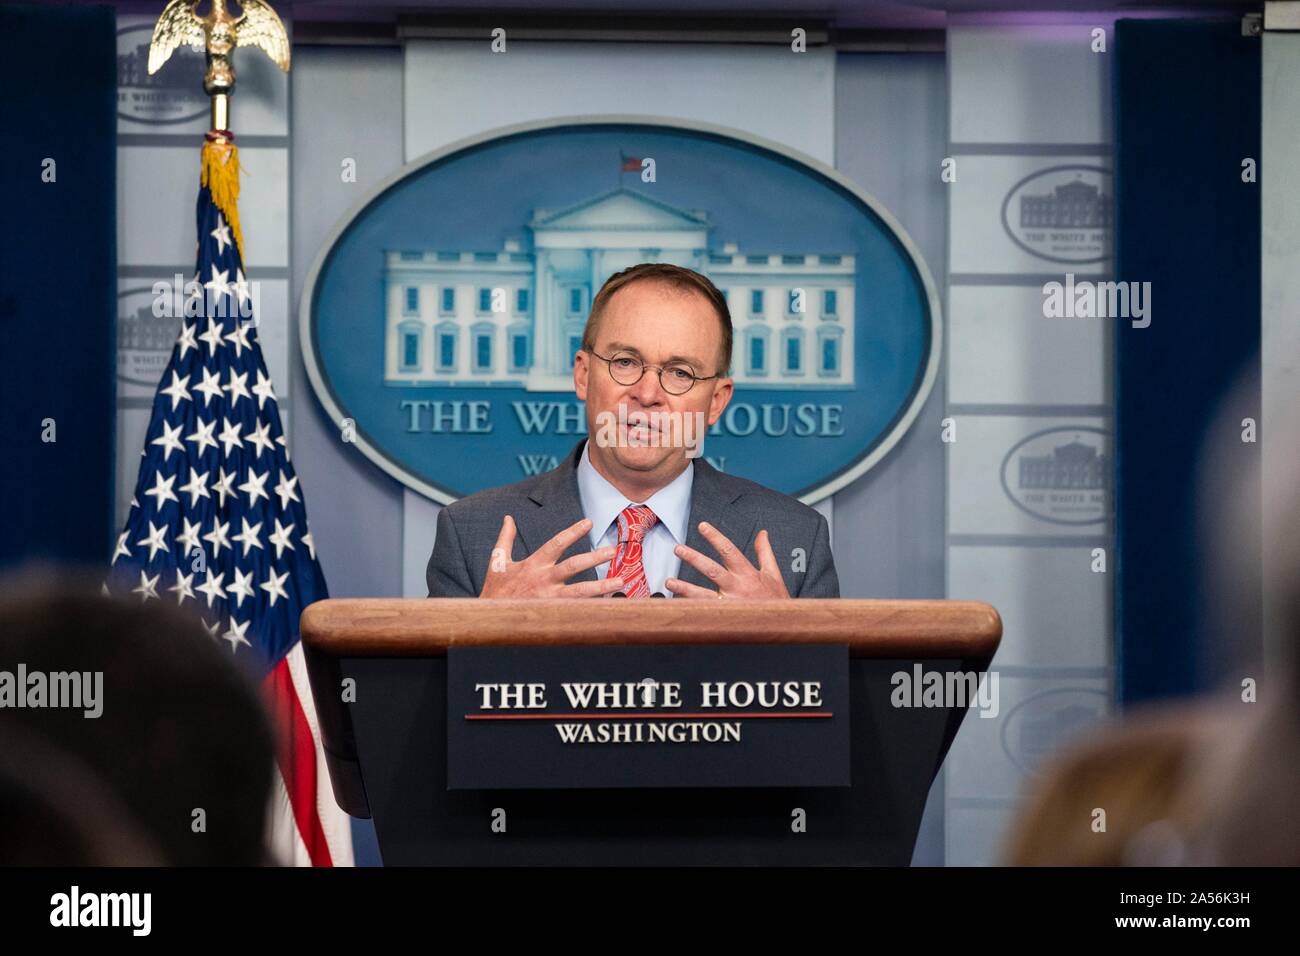 Washington, United States of America. 17 October, 2019. White House acting Chief of Staff Mick Mulvaney speaks with reporters in the James Brady Press Briefing Room at the White House October 17, 2019 in Washington, DC. Mulvaney admitted that a there was a quid pro quo in the presidents dealings with Ukraine but later attempted to walk back the statement.  Credit: Joyce Boghosian/White House Photo/Alamy Live News Stock Photo